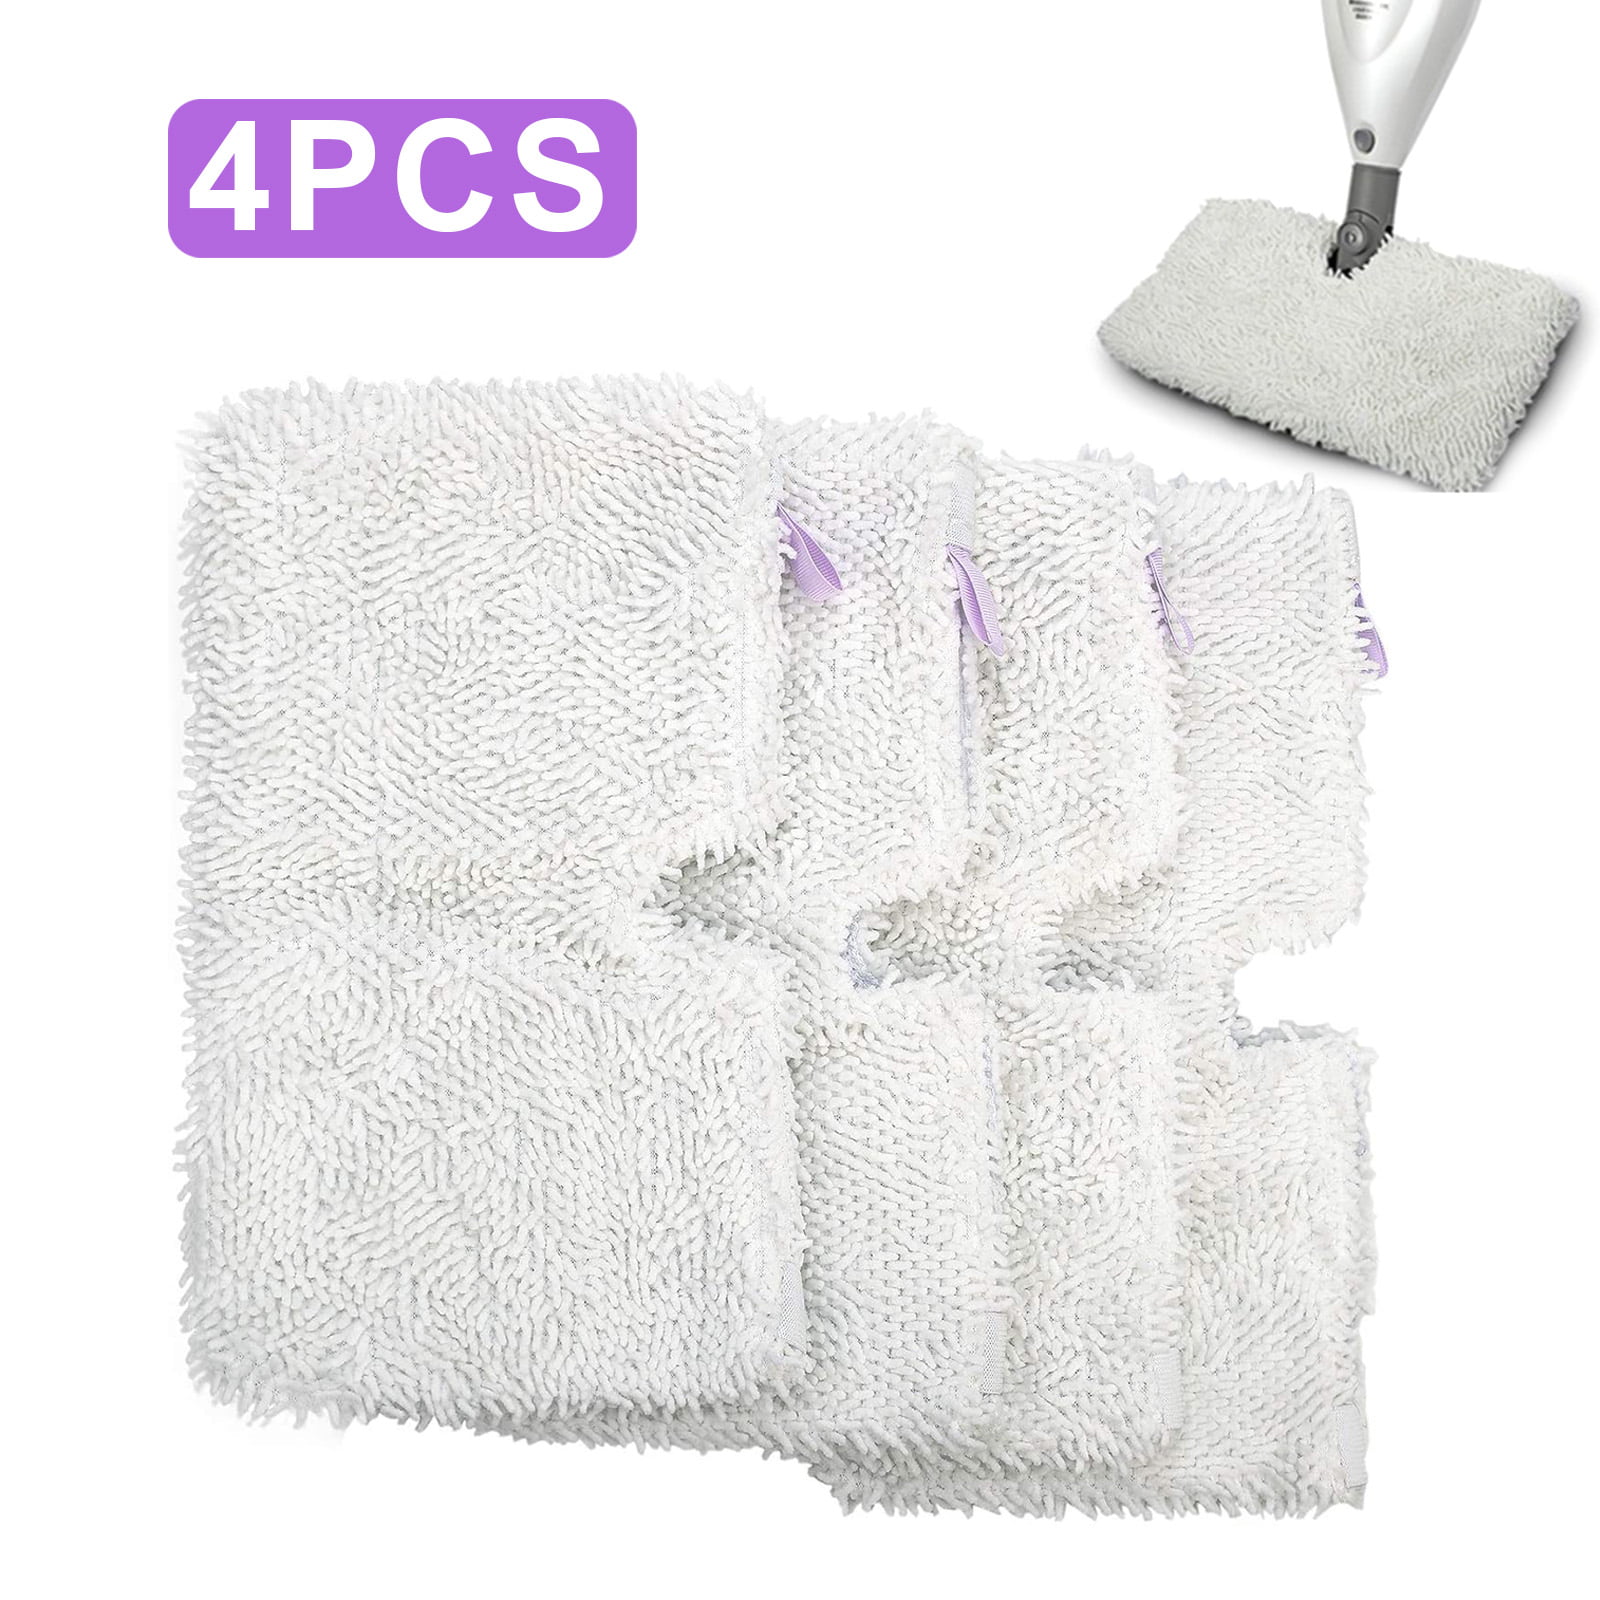 4Pack White Steam Mop Pads Cleaning Cloths for Shark S3550 S3901 S3601 S3501 New 